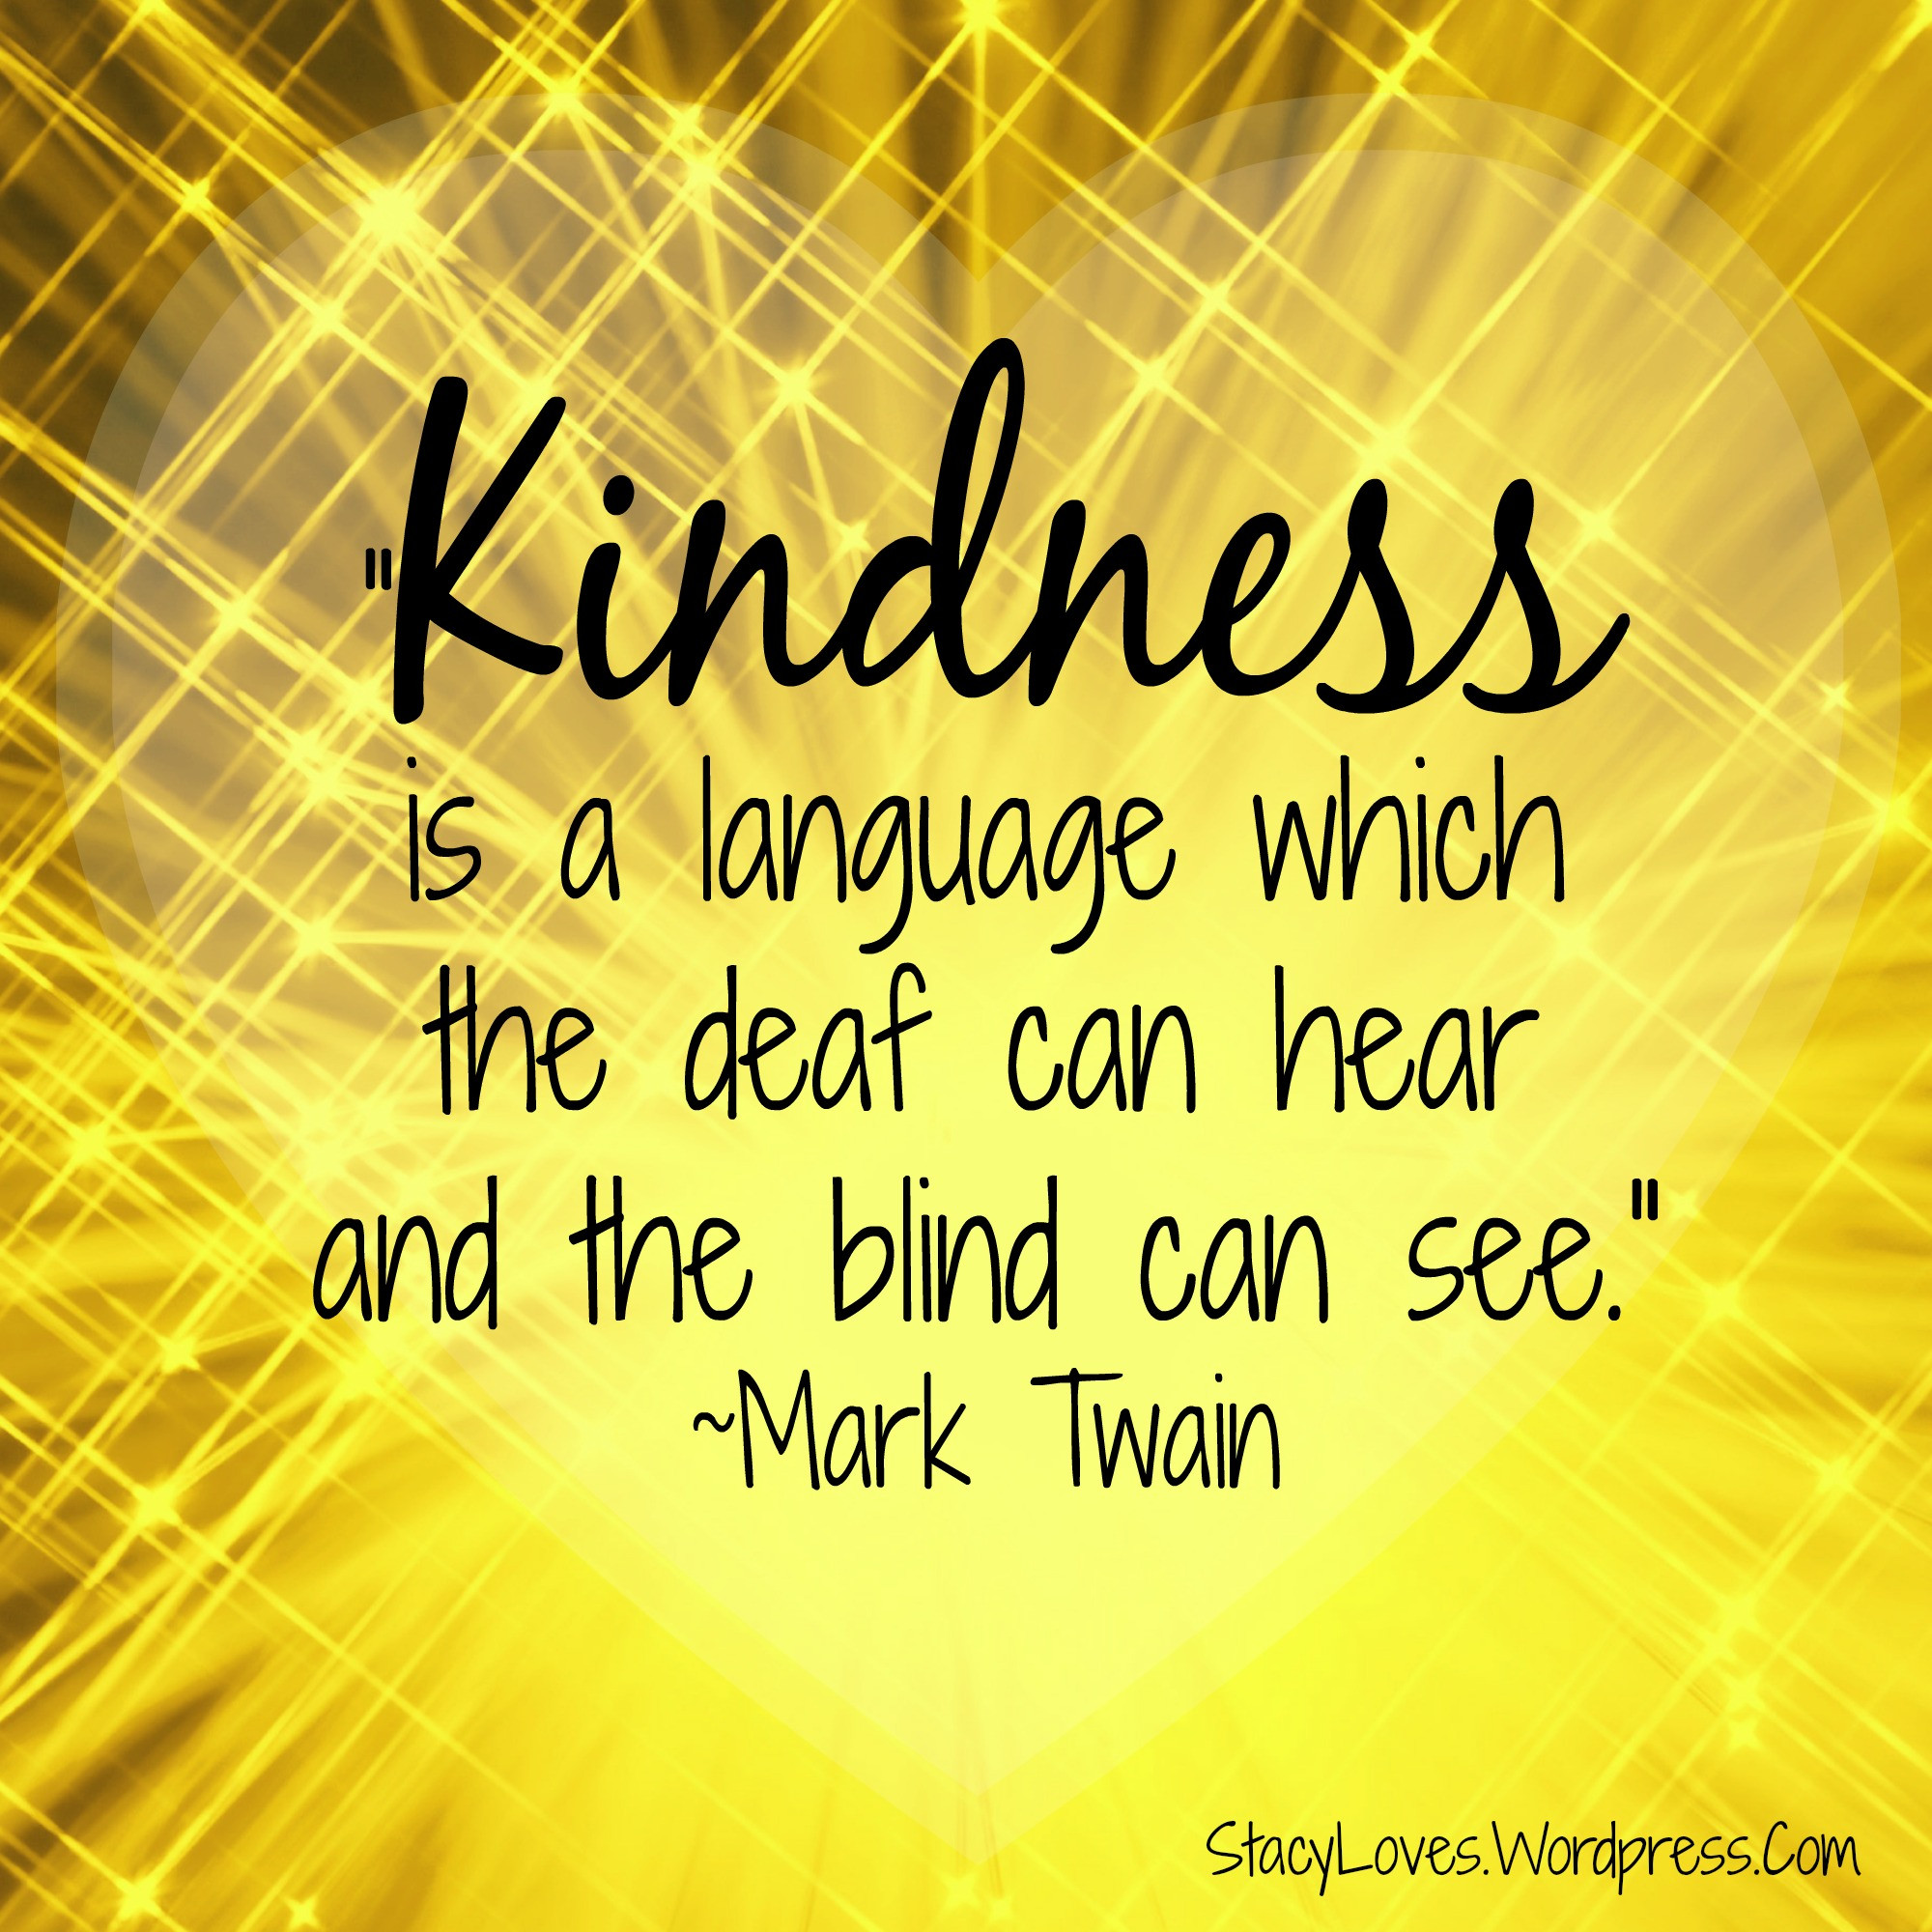 Random Acts Of Kindness Quotes
 Kindness Quotes